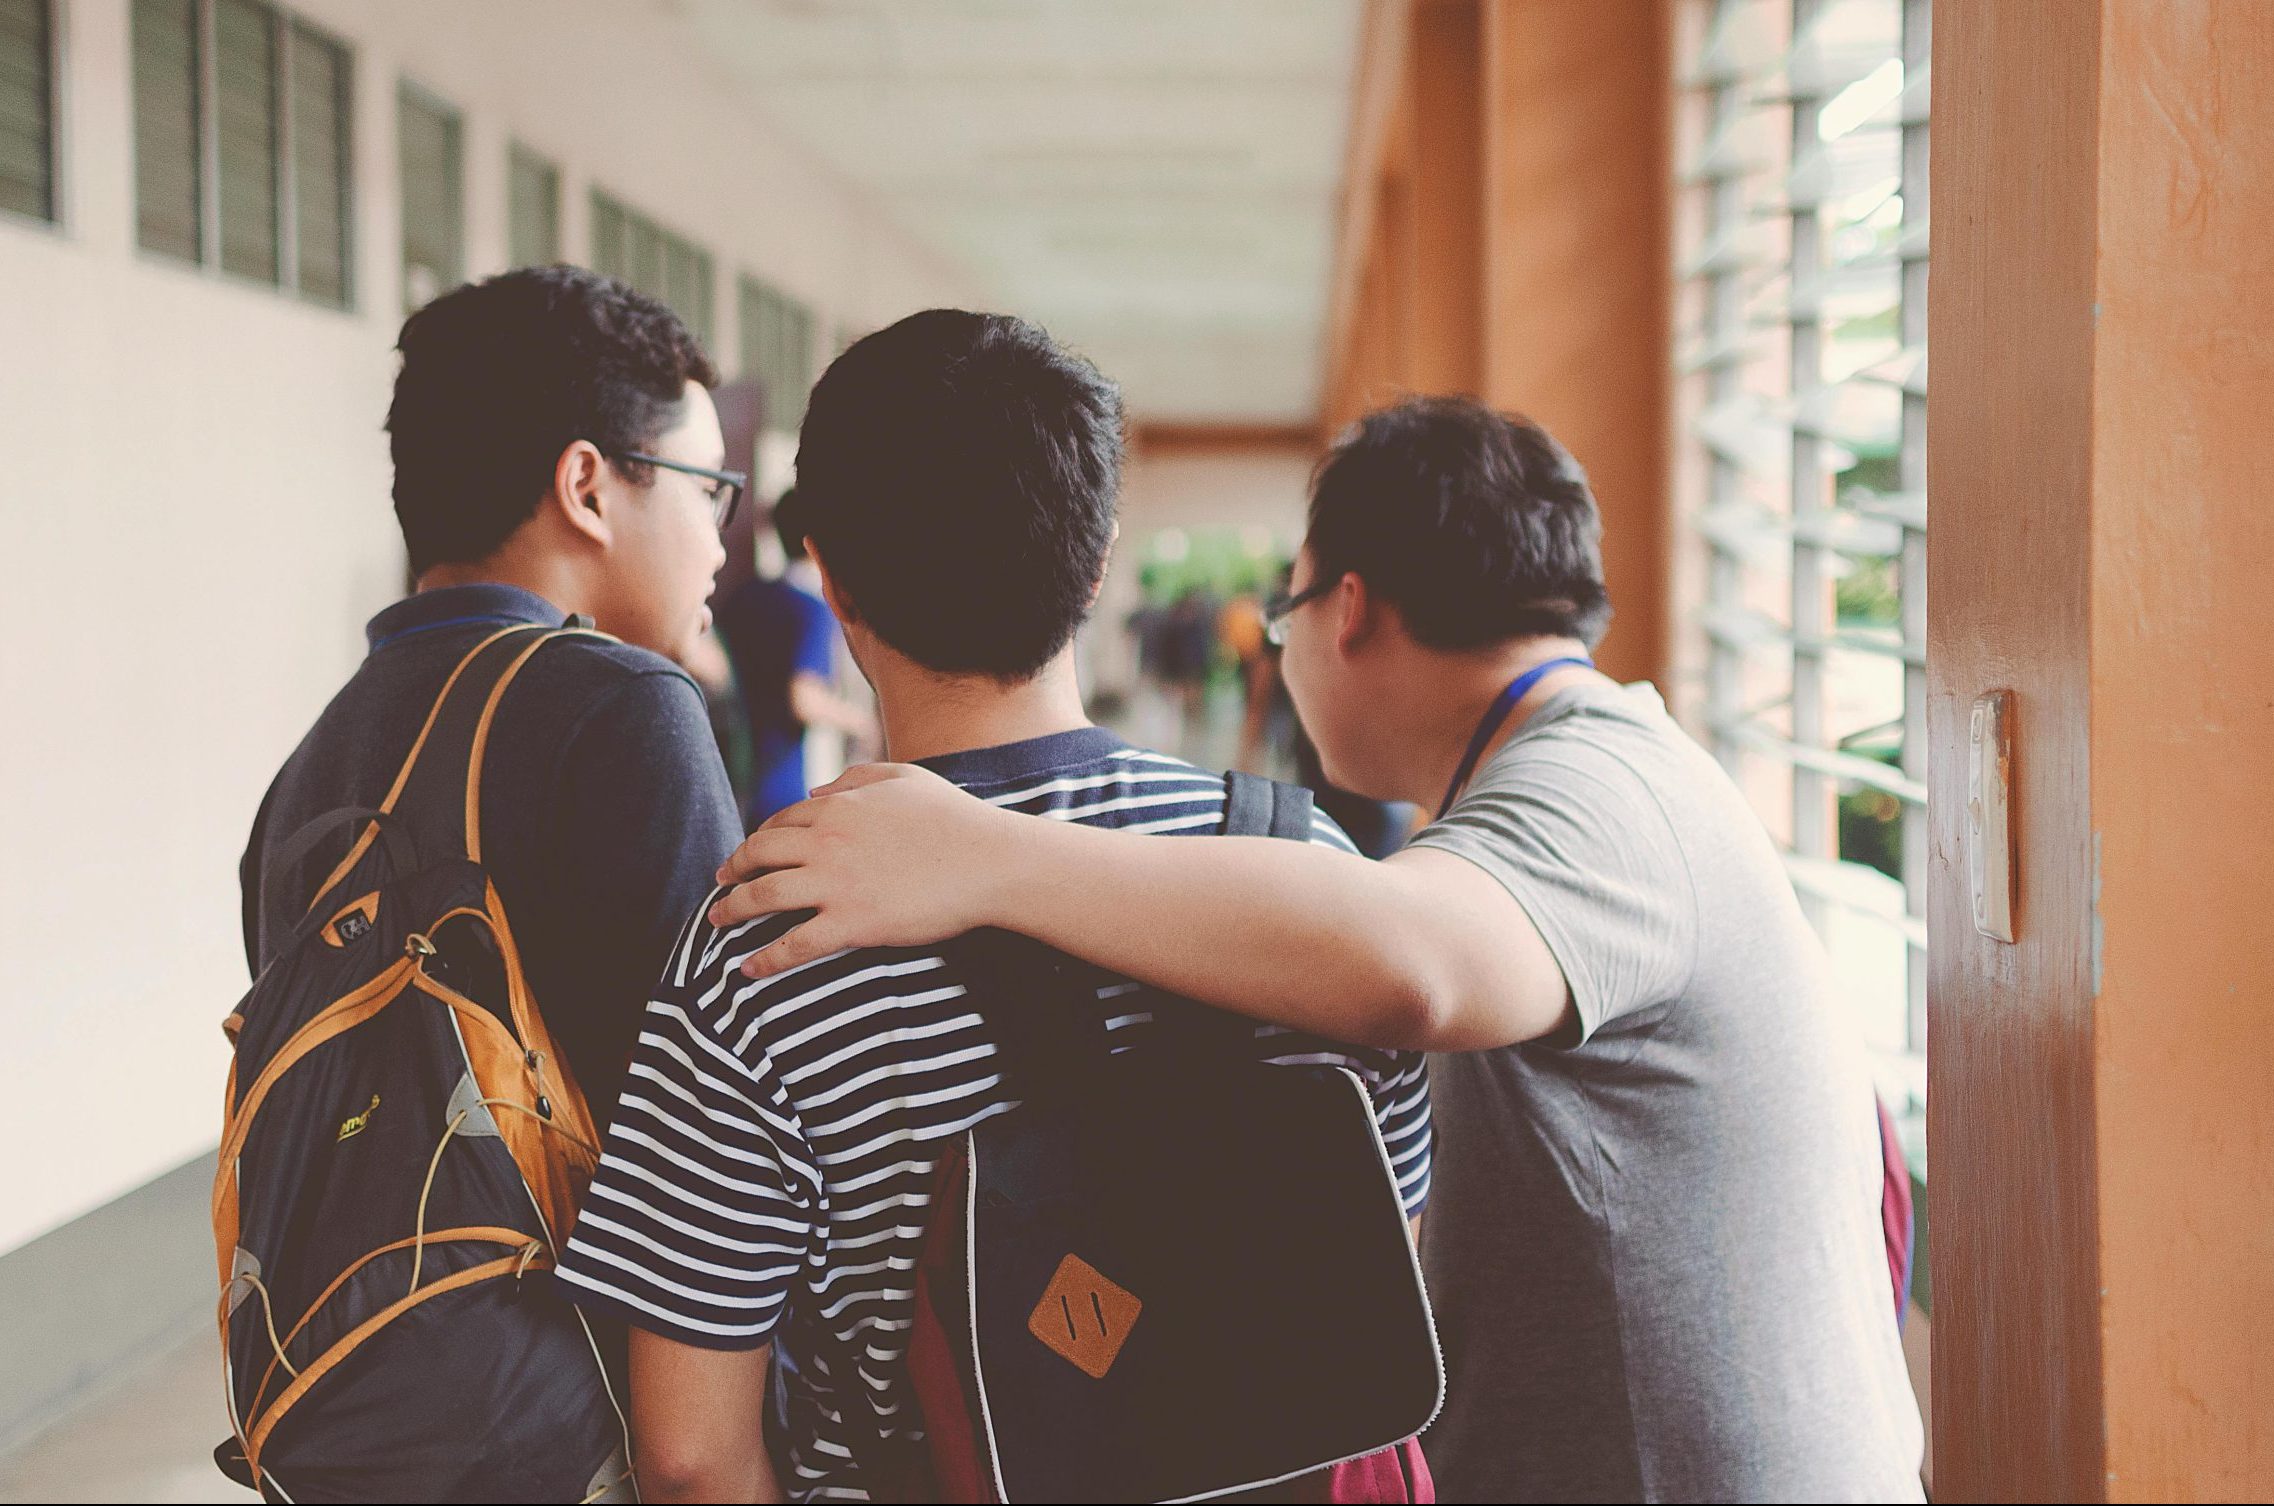 Picture showcasing the backs of three young men. One has their arm around the other to show support and caring behaviour.